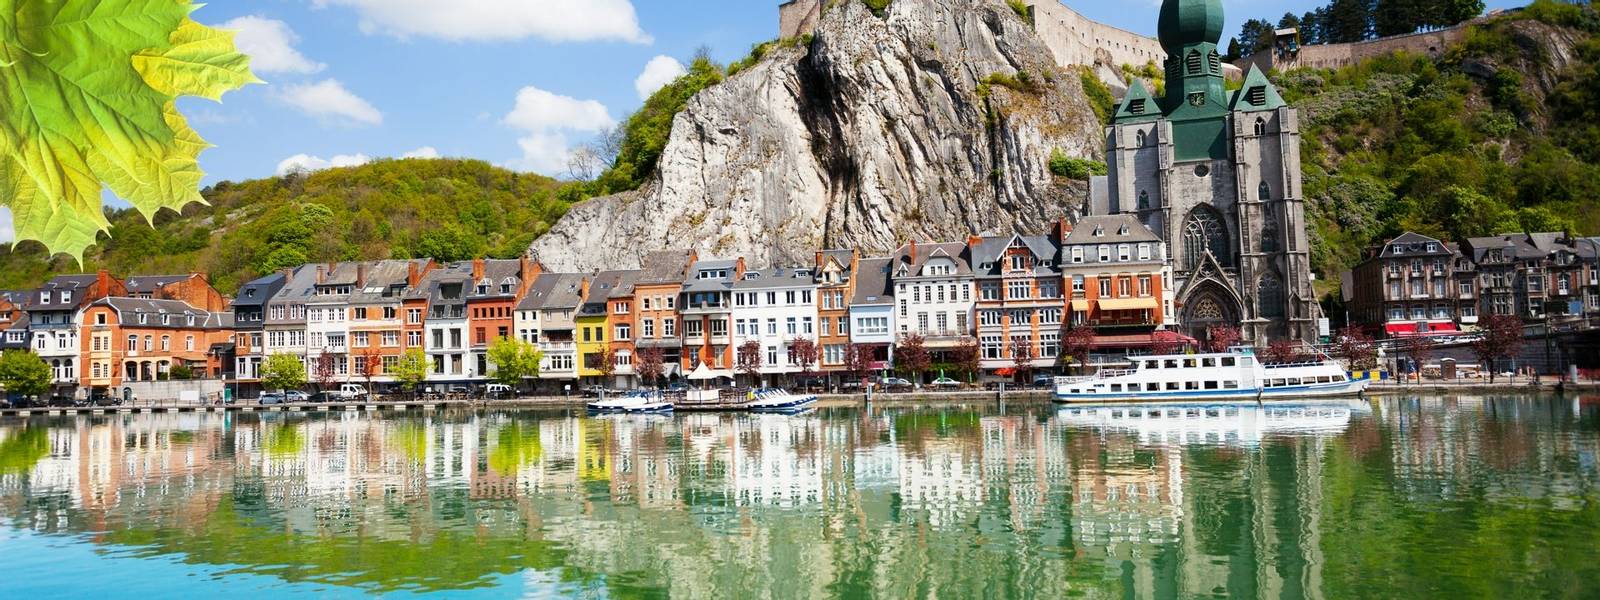 Meuse river with Collegiale Notre Dame, Citadelle de Dinant with white ship in Belgium